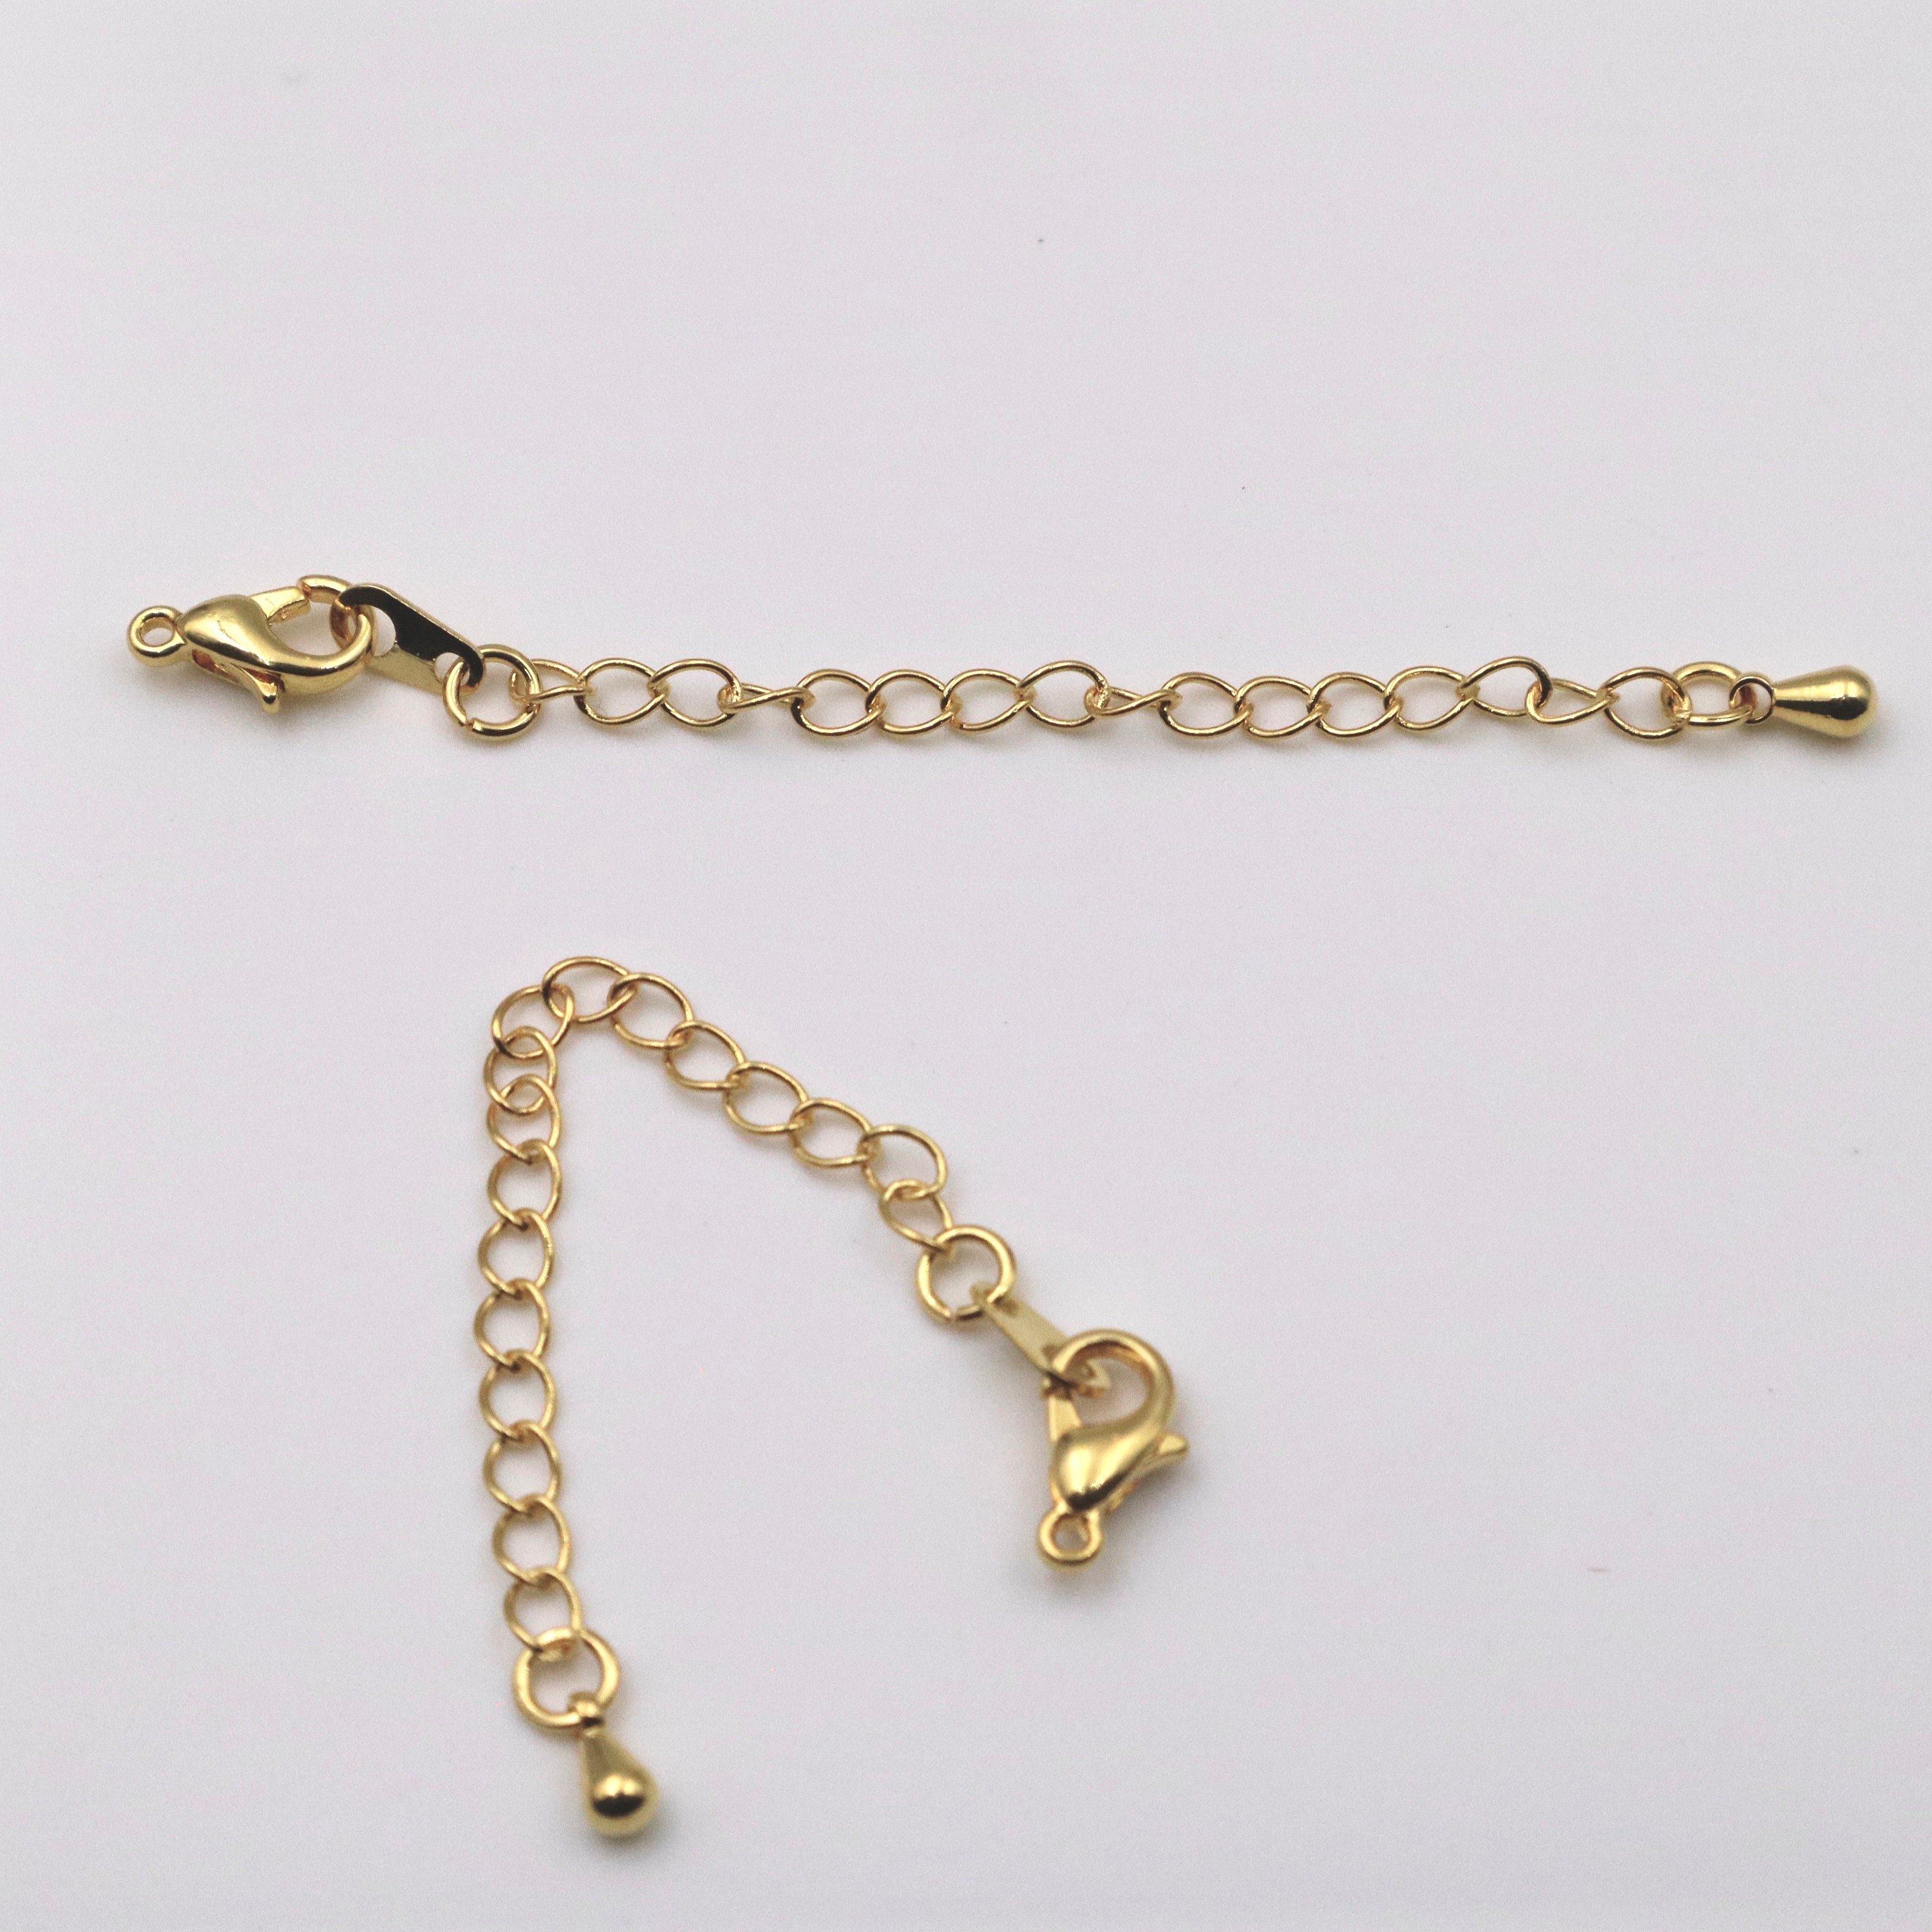 14k Solid Gold Necklace or Bracelet Extender, Removal Solid Gold Link,  Adjustable Extension Chain Gold,rose Gold,white Gold Jewelry Extender 